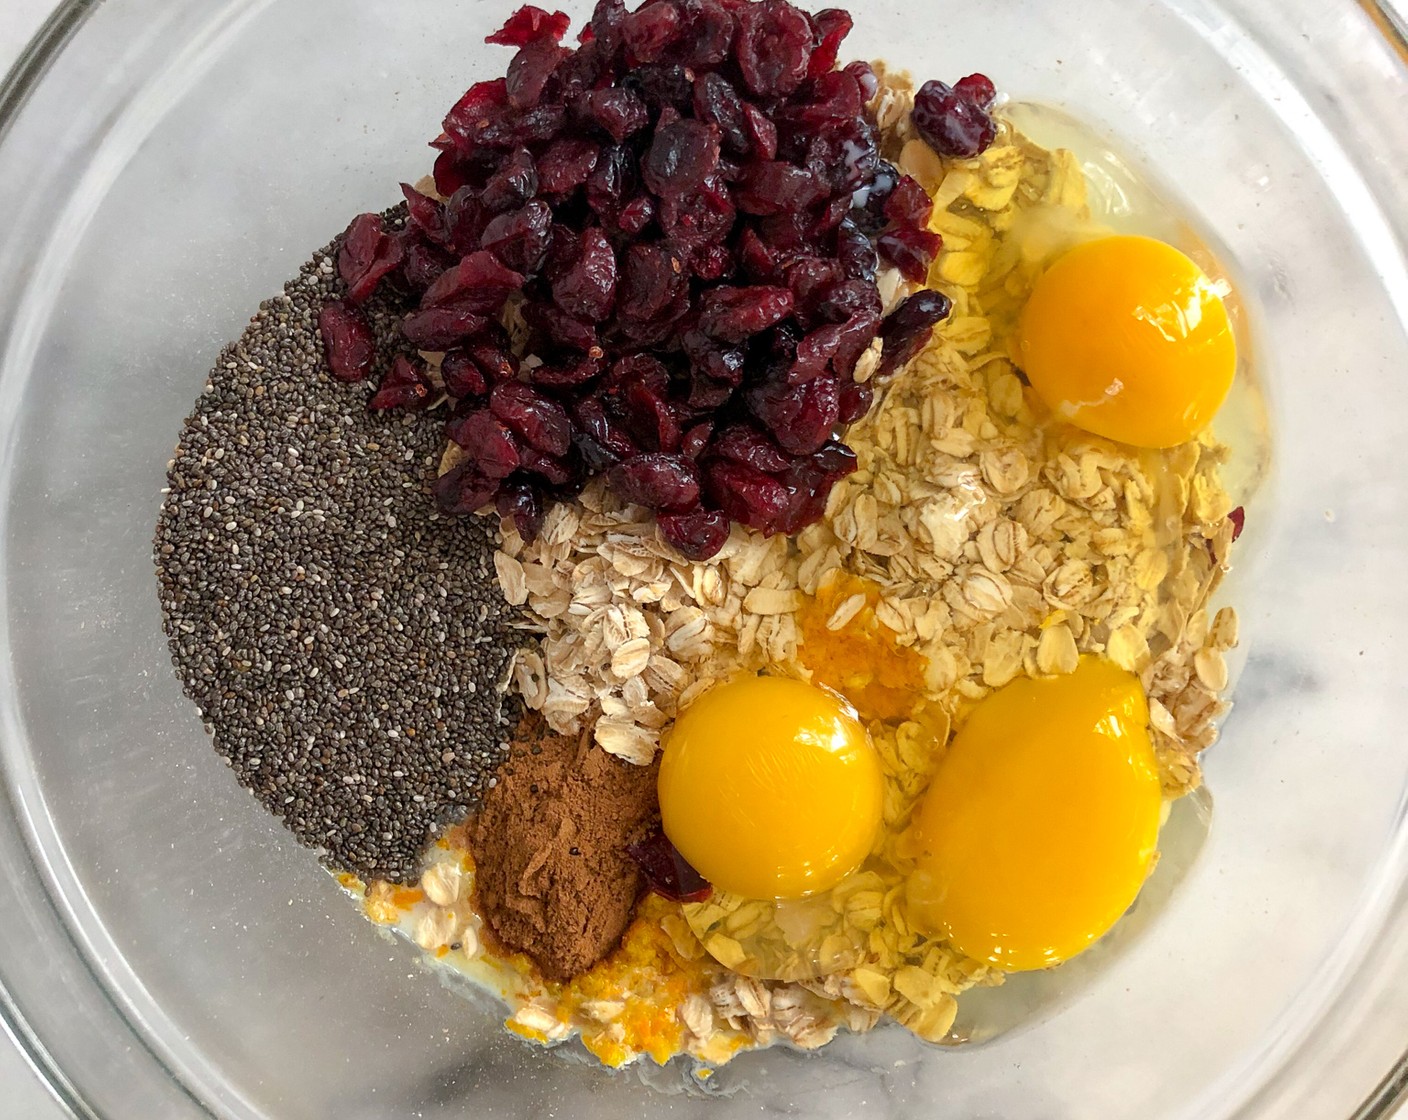 step 2 In a large bowl, mix together the Old Fashioned Rolled Oats (2 cups), Chia Seeds (1/4 cup), Pumpkin Pie Spice (1 Tbsp), Salt (1/2 tsp), Milk (3/4 cup), the juice and zest from the Orange (1), Farmhouse Eggs® Large Brown Eggs (3), Maple Syrup (2 Tbsp), and Dried Cranberries (1/2 cup) until combined.